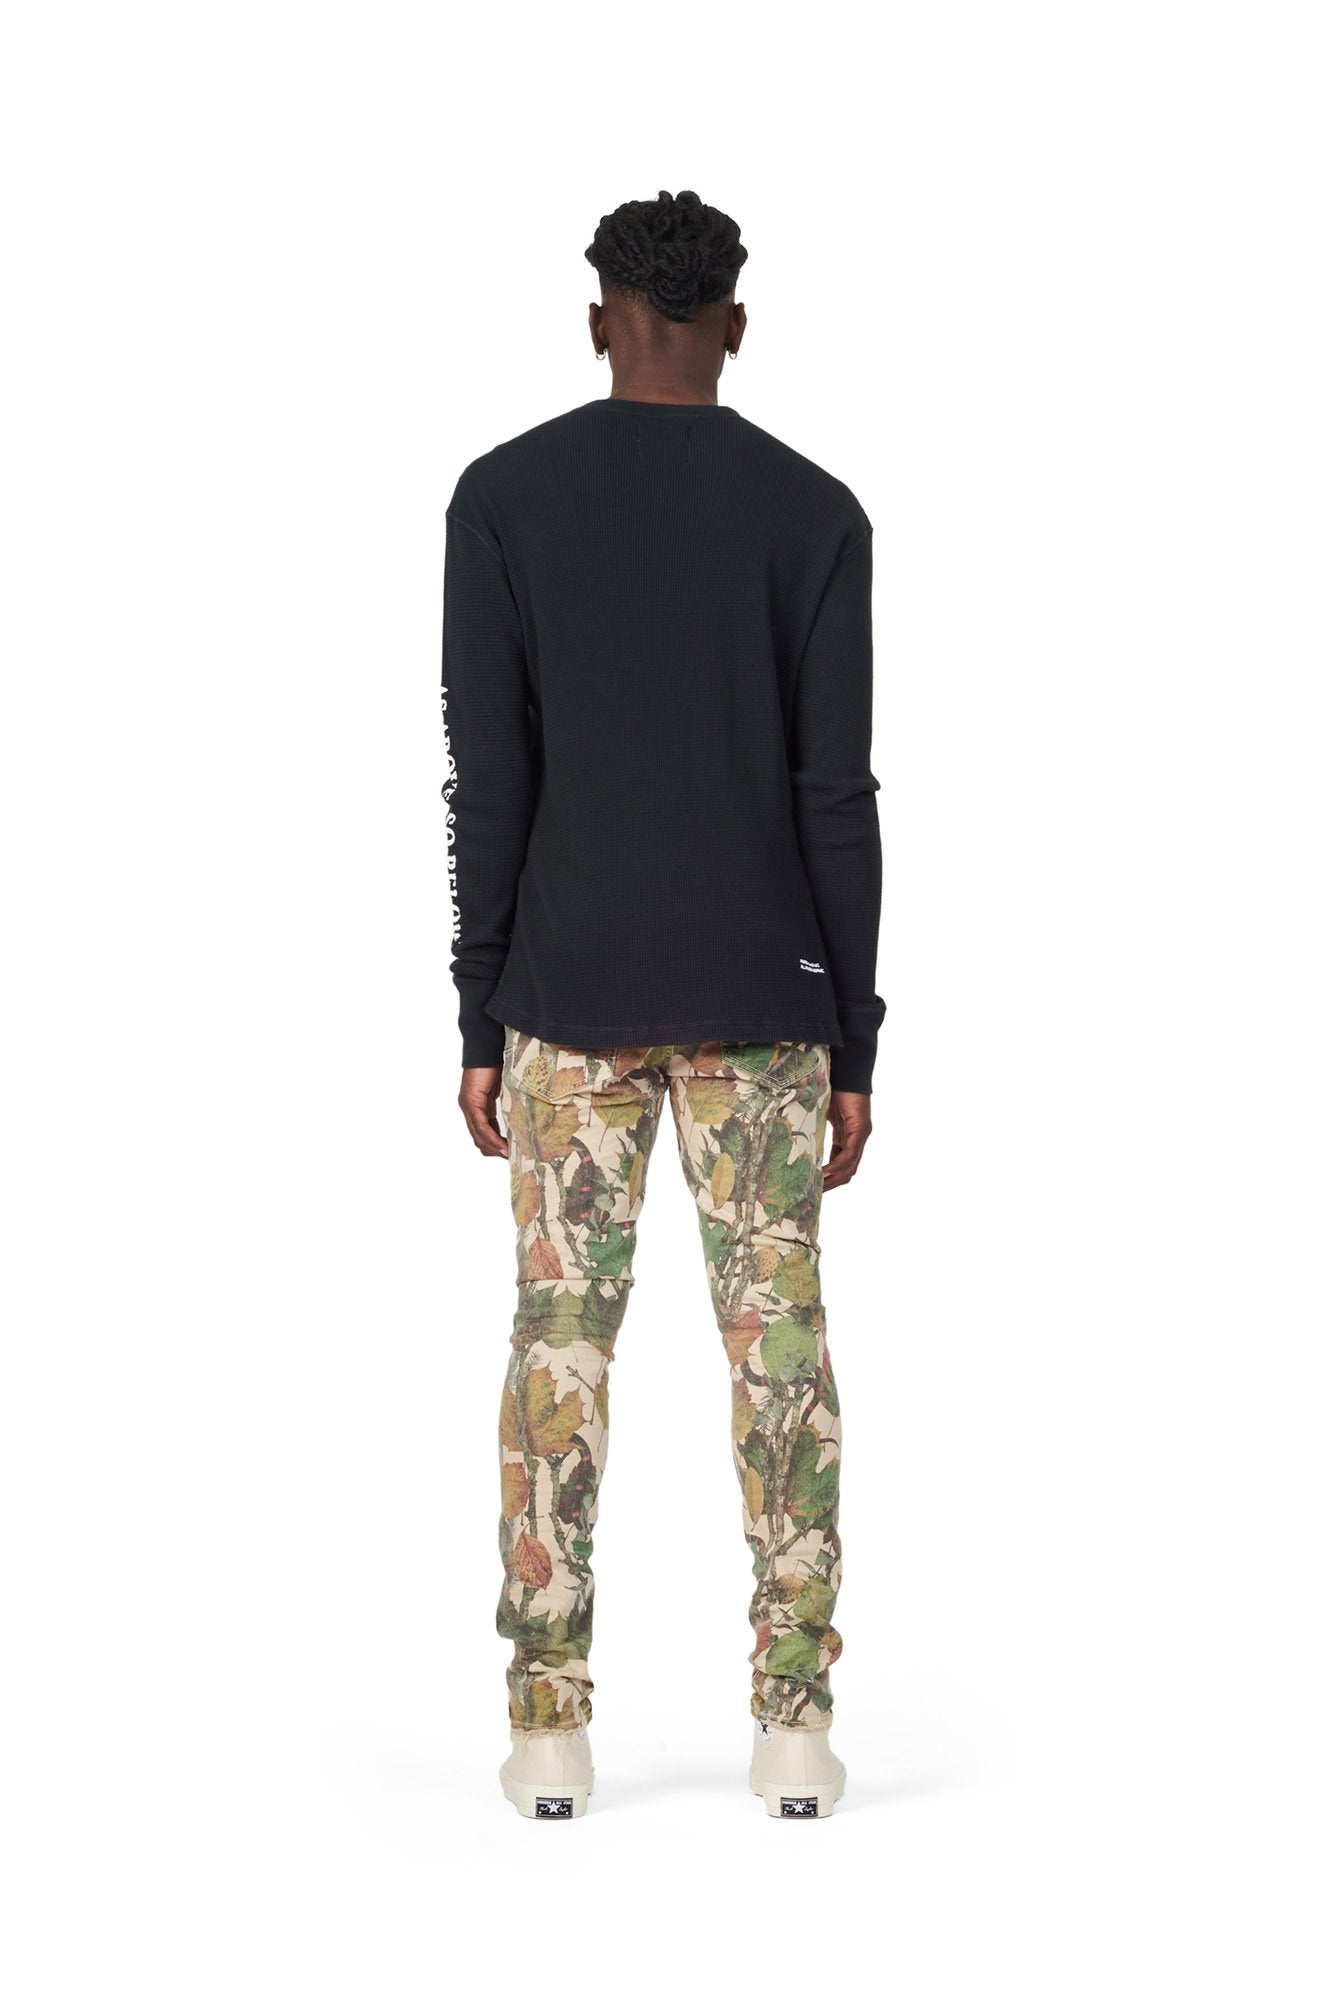 WASHED CAMO TAN SNAKE P001 LOW RISE SKINNY